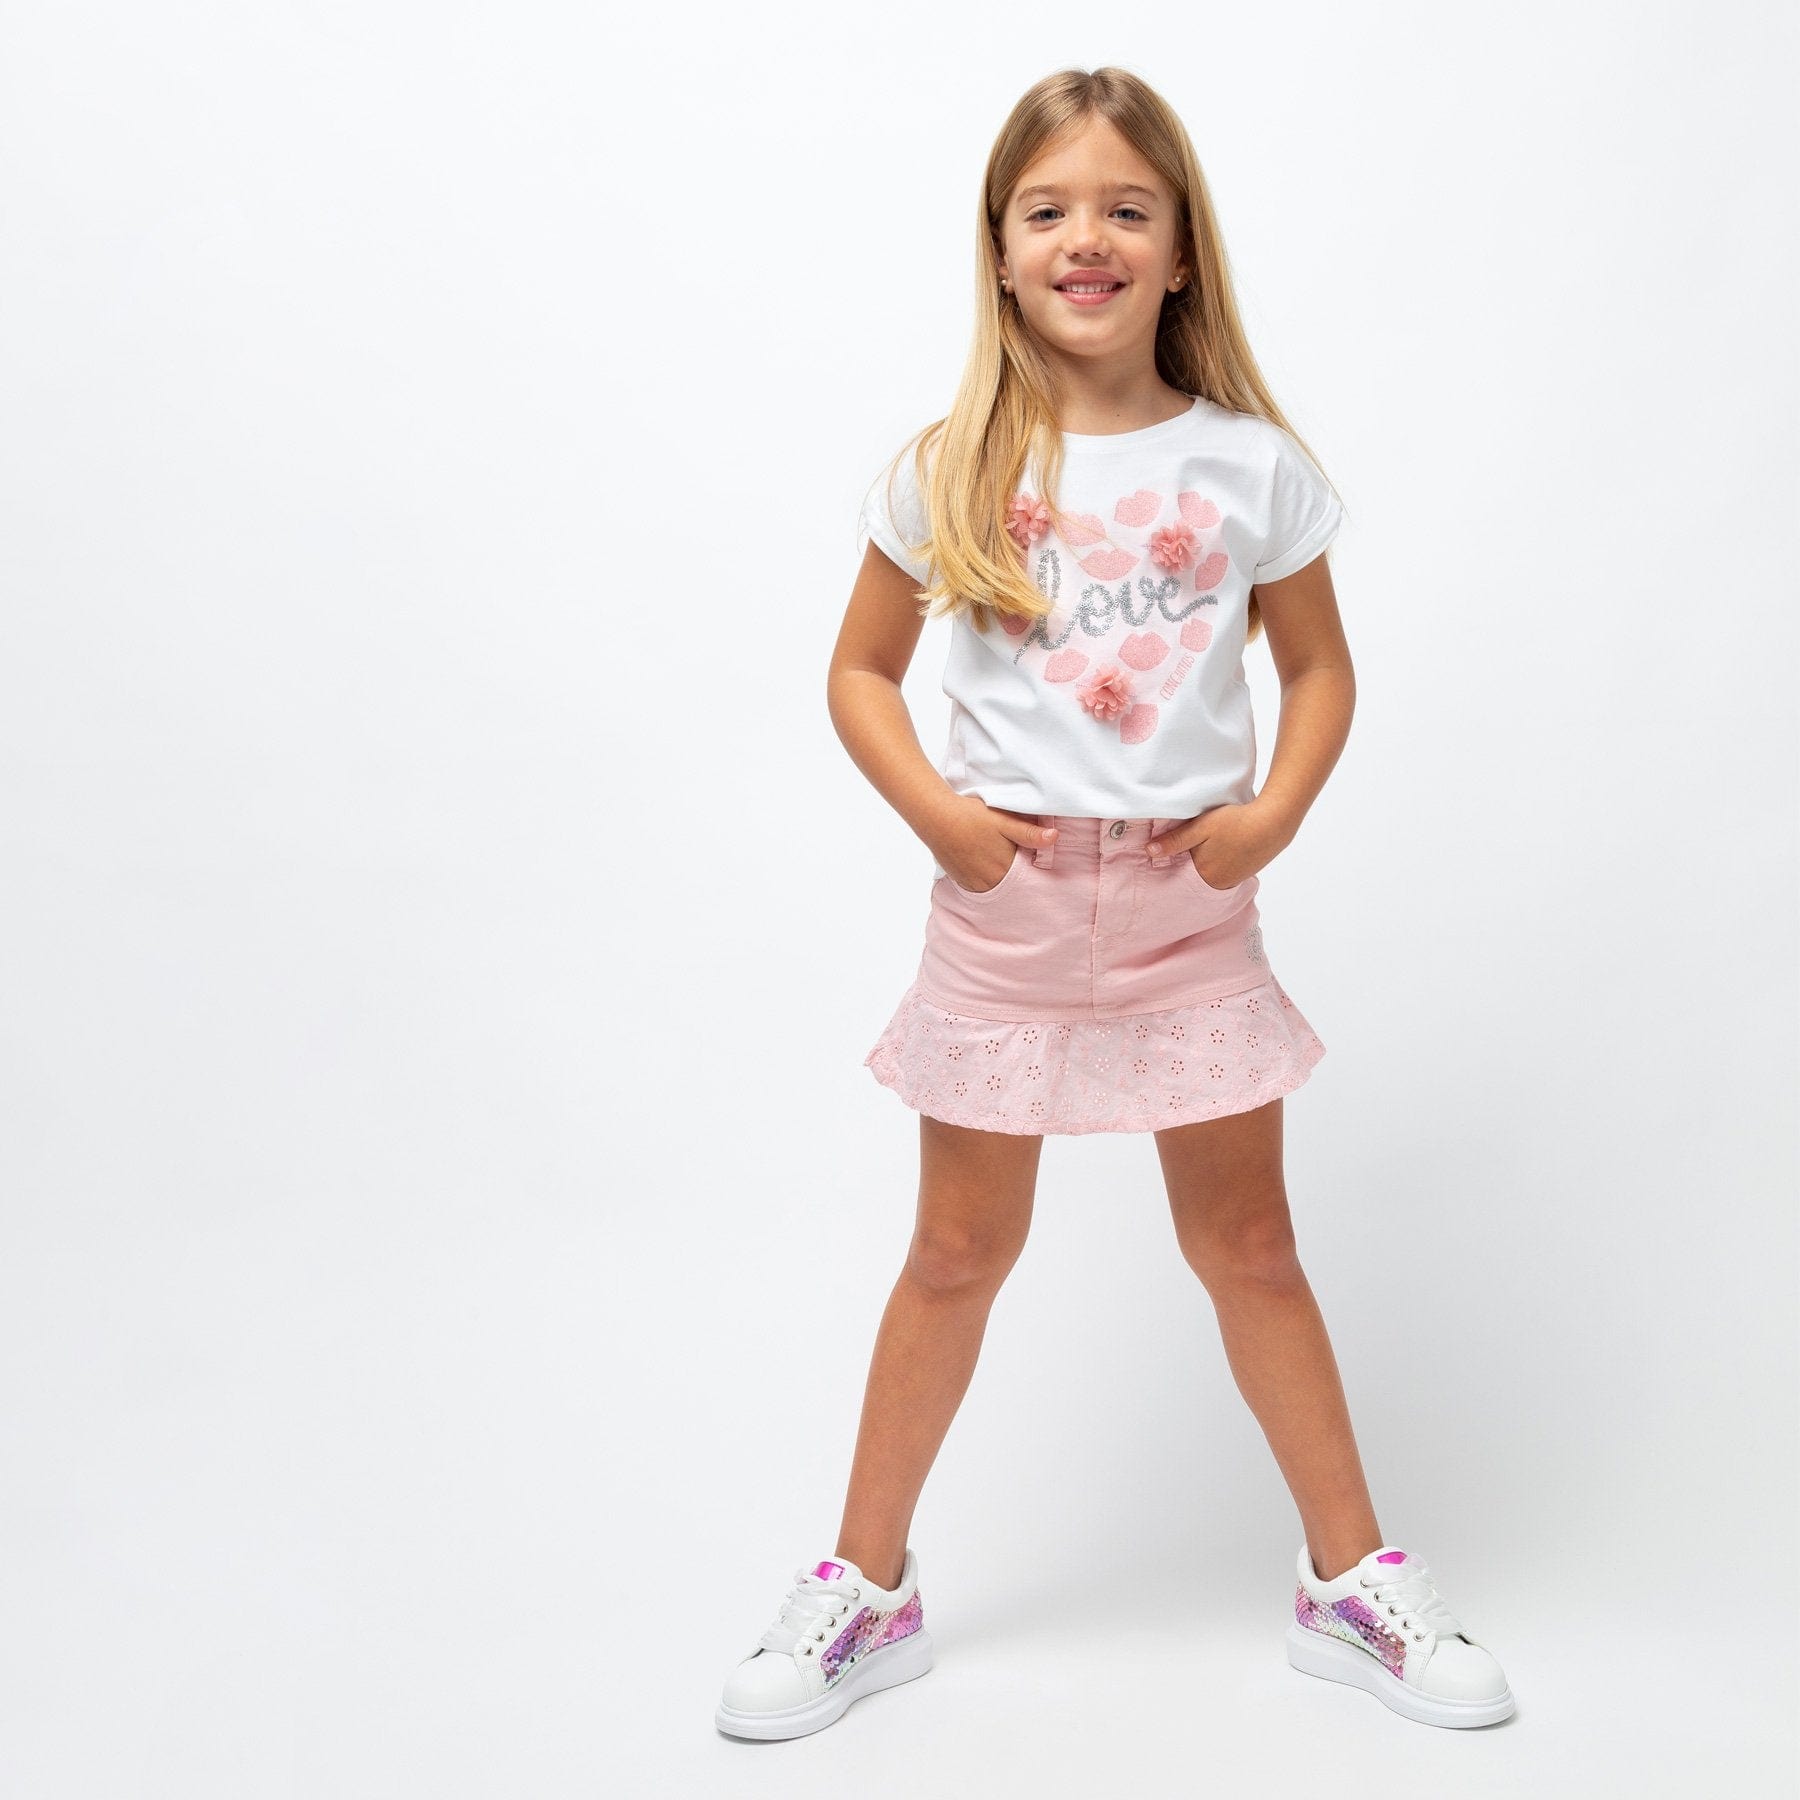 FRESAS CON NATA Shoes Girl's Pink Sequins Sneakers